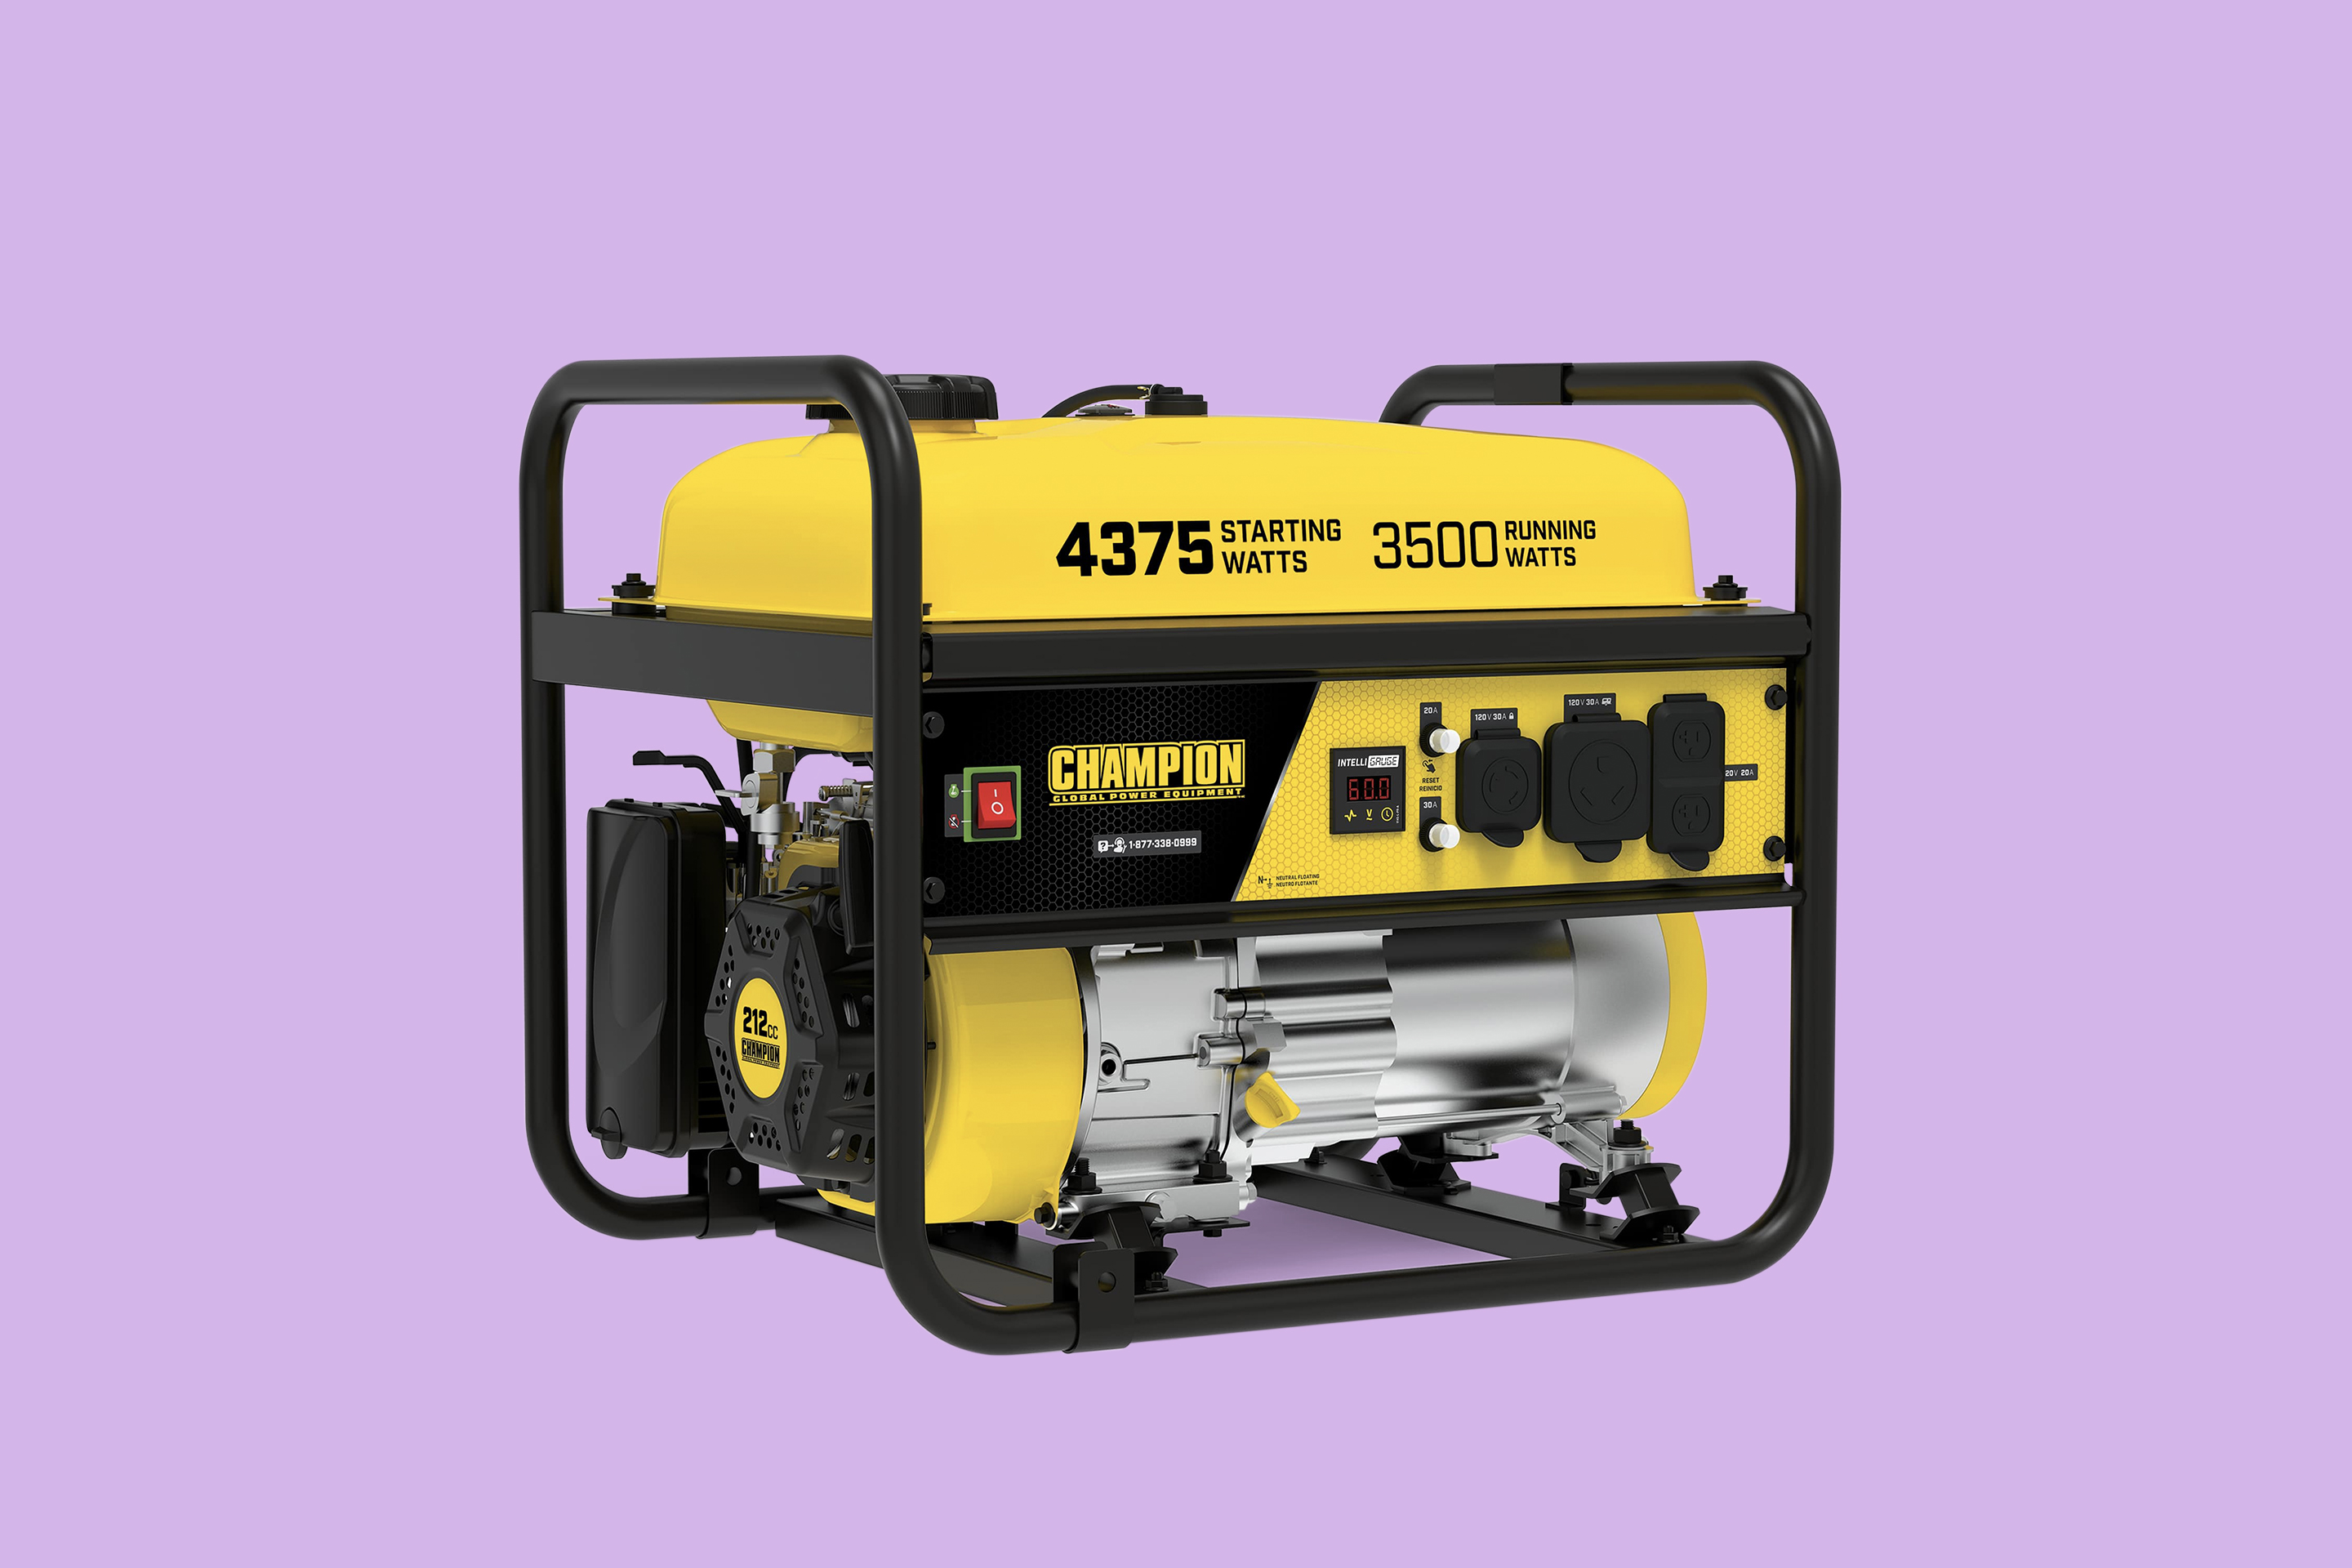 A black and yellow Champion power generator in front of a purple background